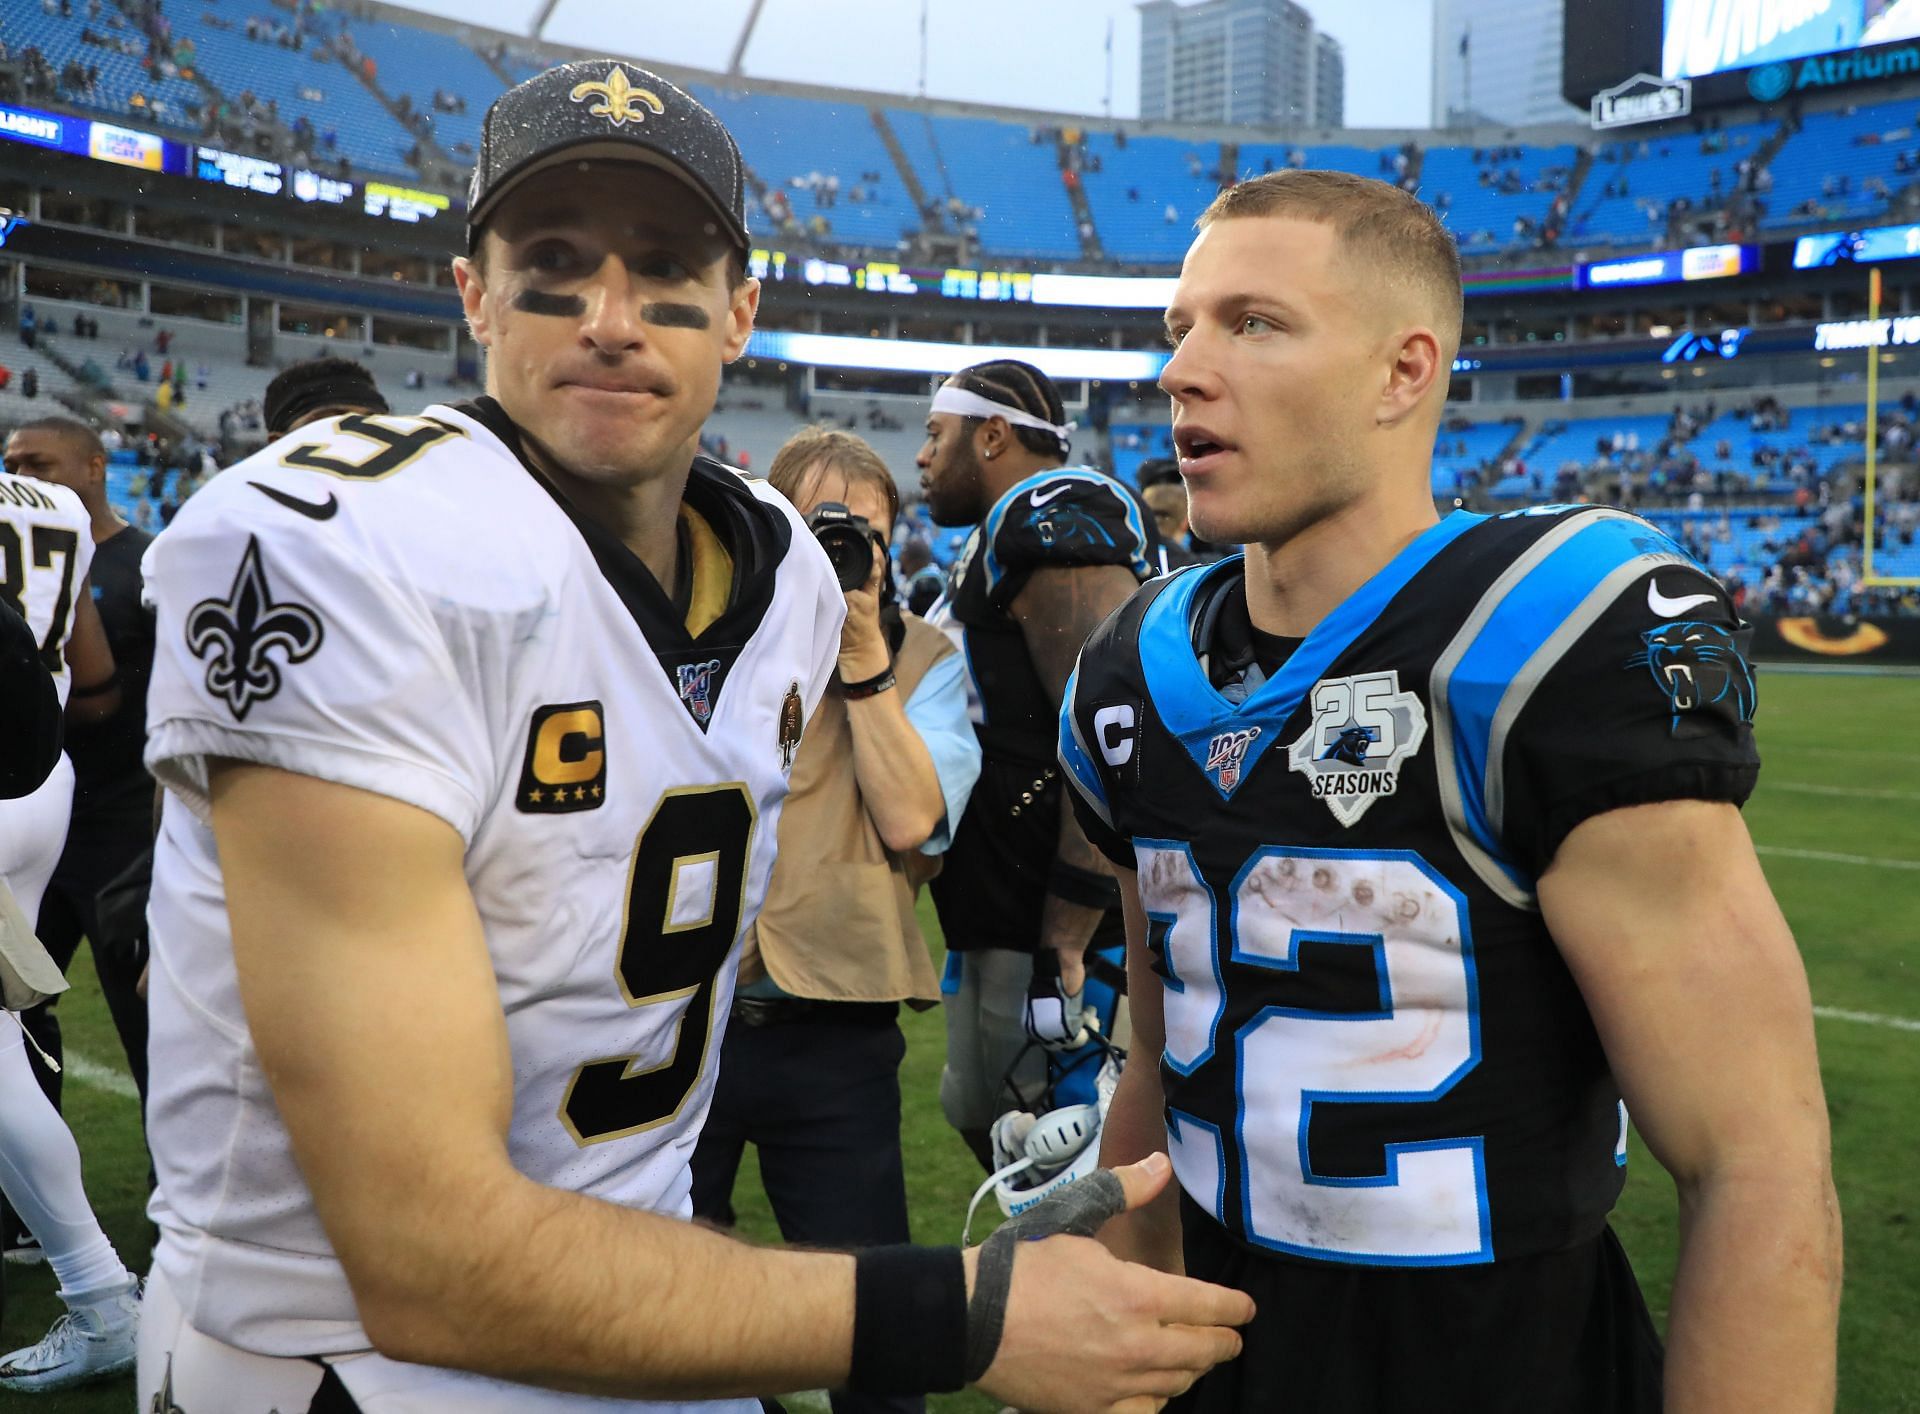 There&#039;s already a potential Drew Brees connection brewing in the Carolinas